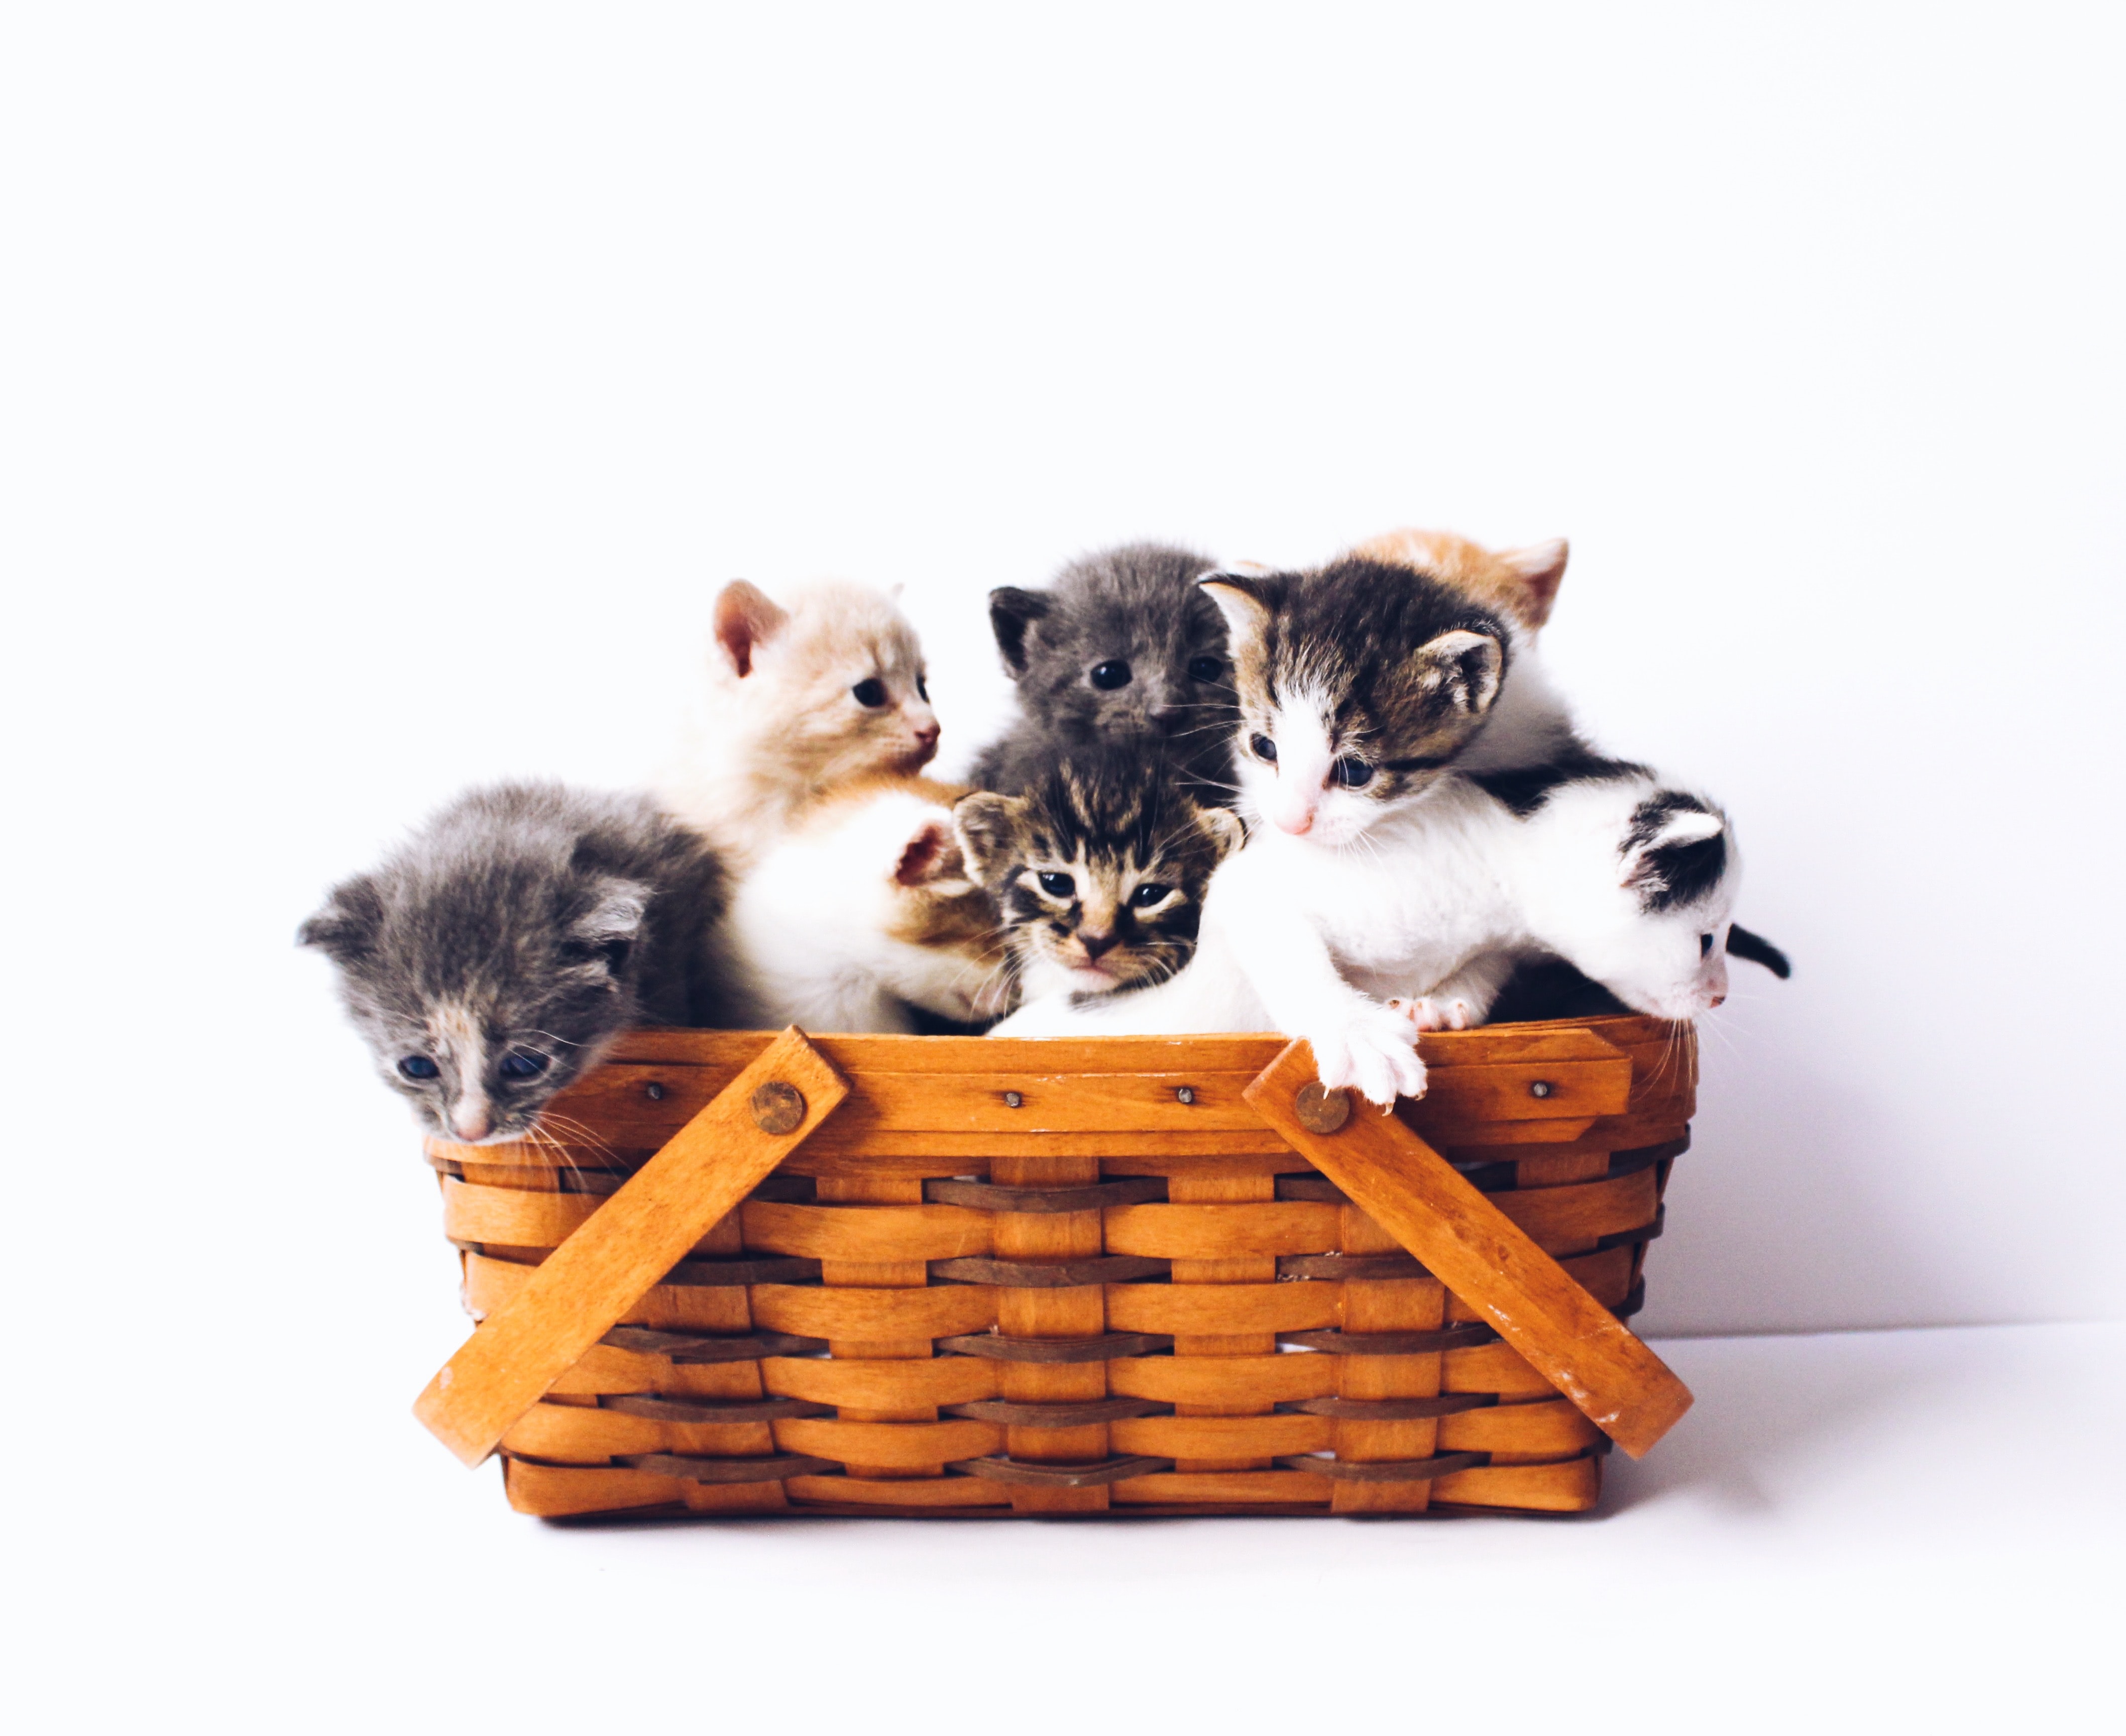 Several adorable little kittens in a basket